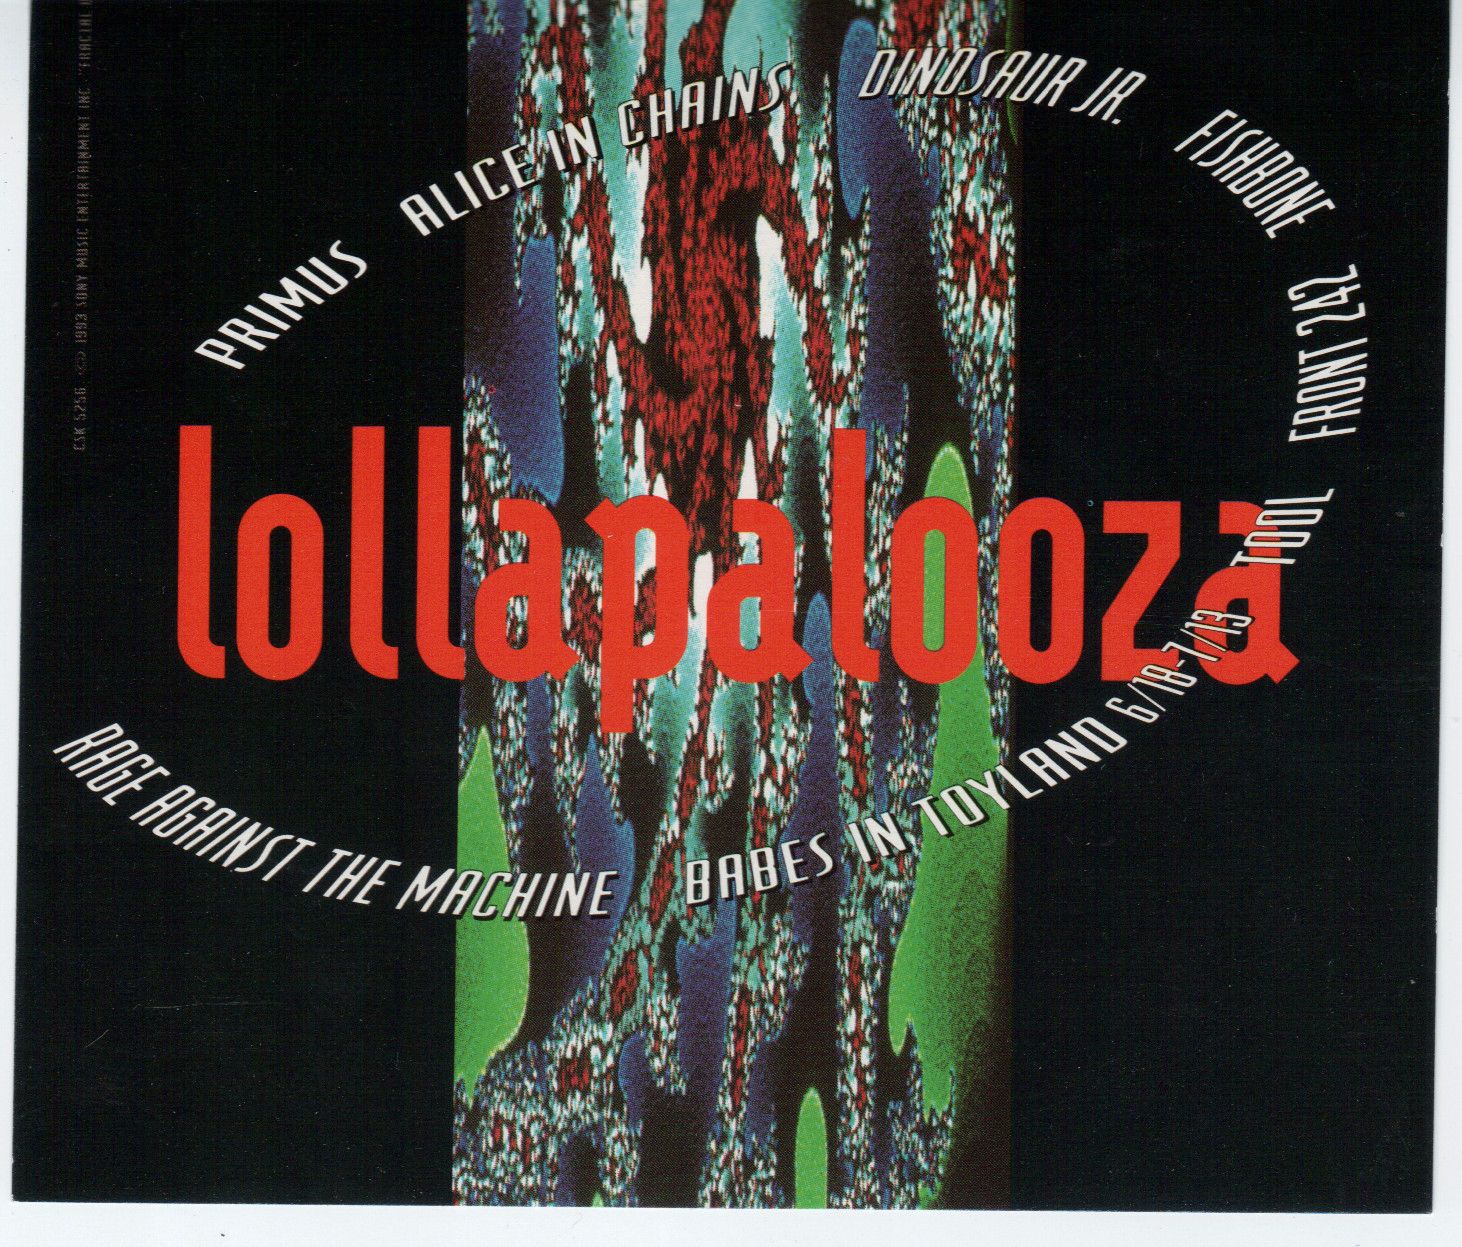 Front 242 Collector Compilation of the Week Lollapalooza 1993